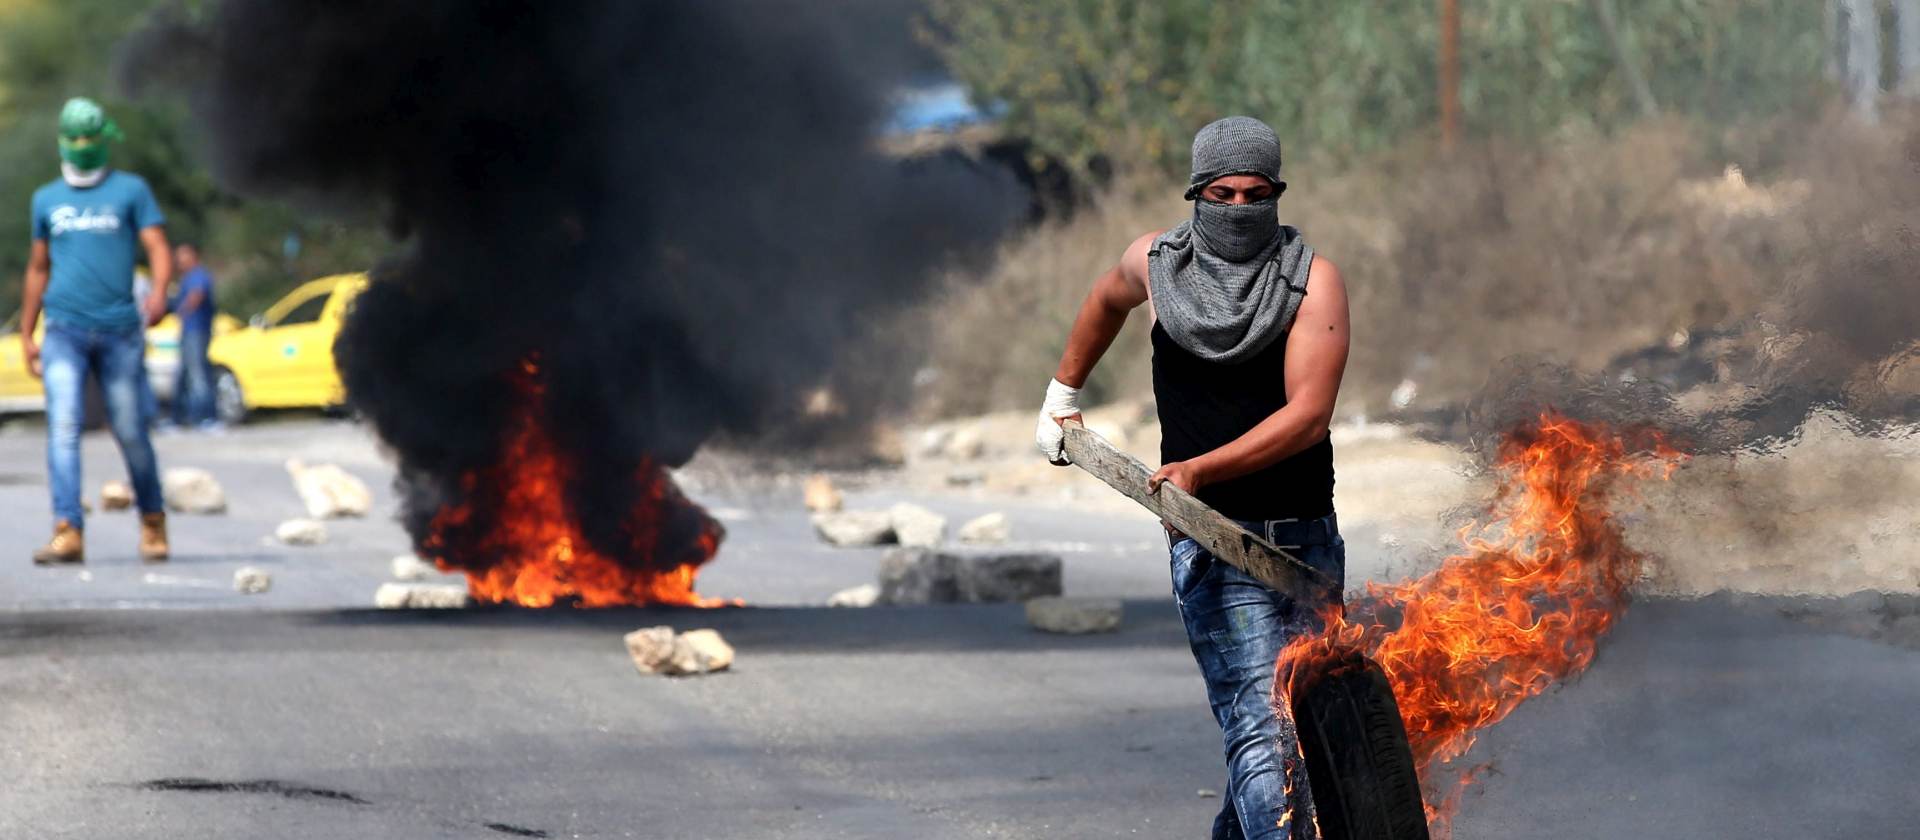 epa04985442 A Palestinian protester fuels a burning barricade with a tire during clashes with Israeli security forces in near Al Fawar Refugee camp near Hebron city, 20 October 2015. UN Secretary General Ban Ki-moon will urge calm during a visit on 20 October 2015 to Israel and the West Bank as he seeks to end more than two weeks of the worst street violence in years.  EPA/ABED AL HASHLAMOUN